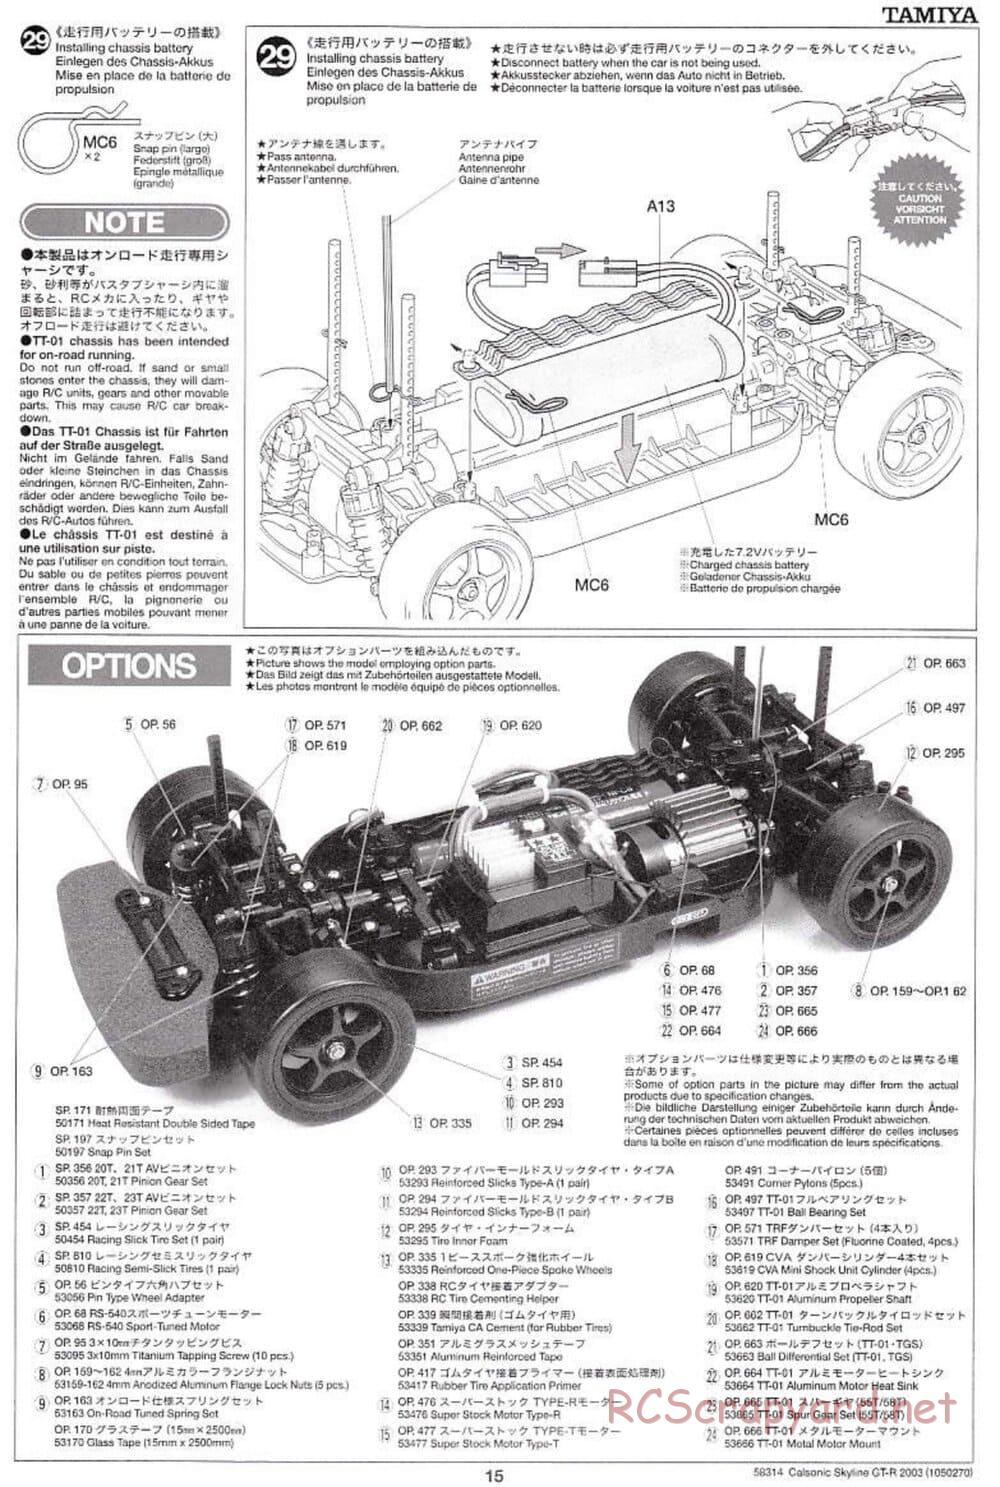 Tamiya - Calsonic Skyline GT-R 2003 - TT-01 Chassis - Manual - Page 15